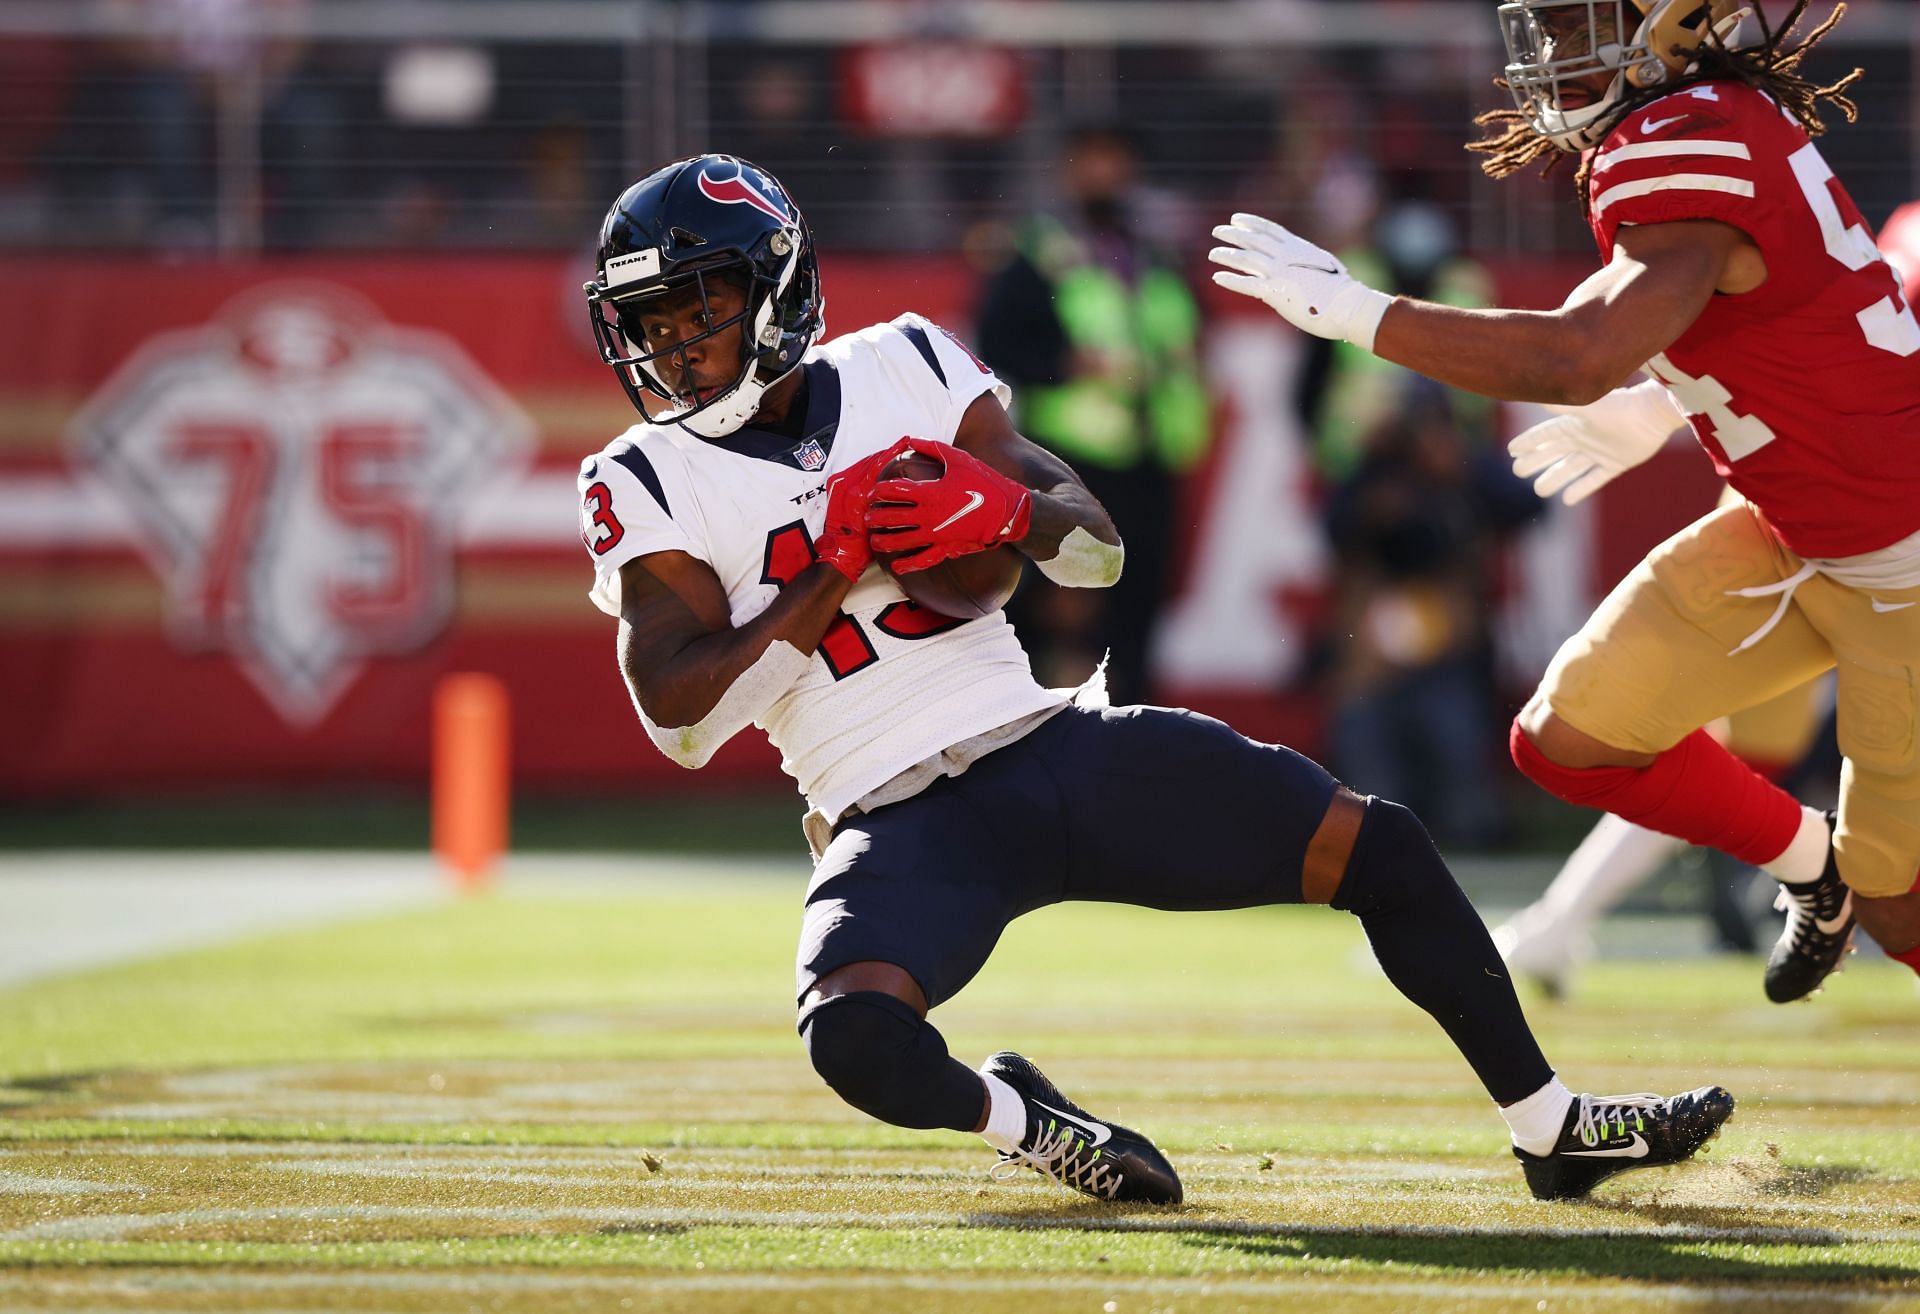 Brandin Cooks has been has been a superb performer for Houston Texans in NFL